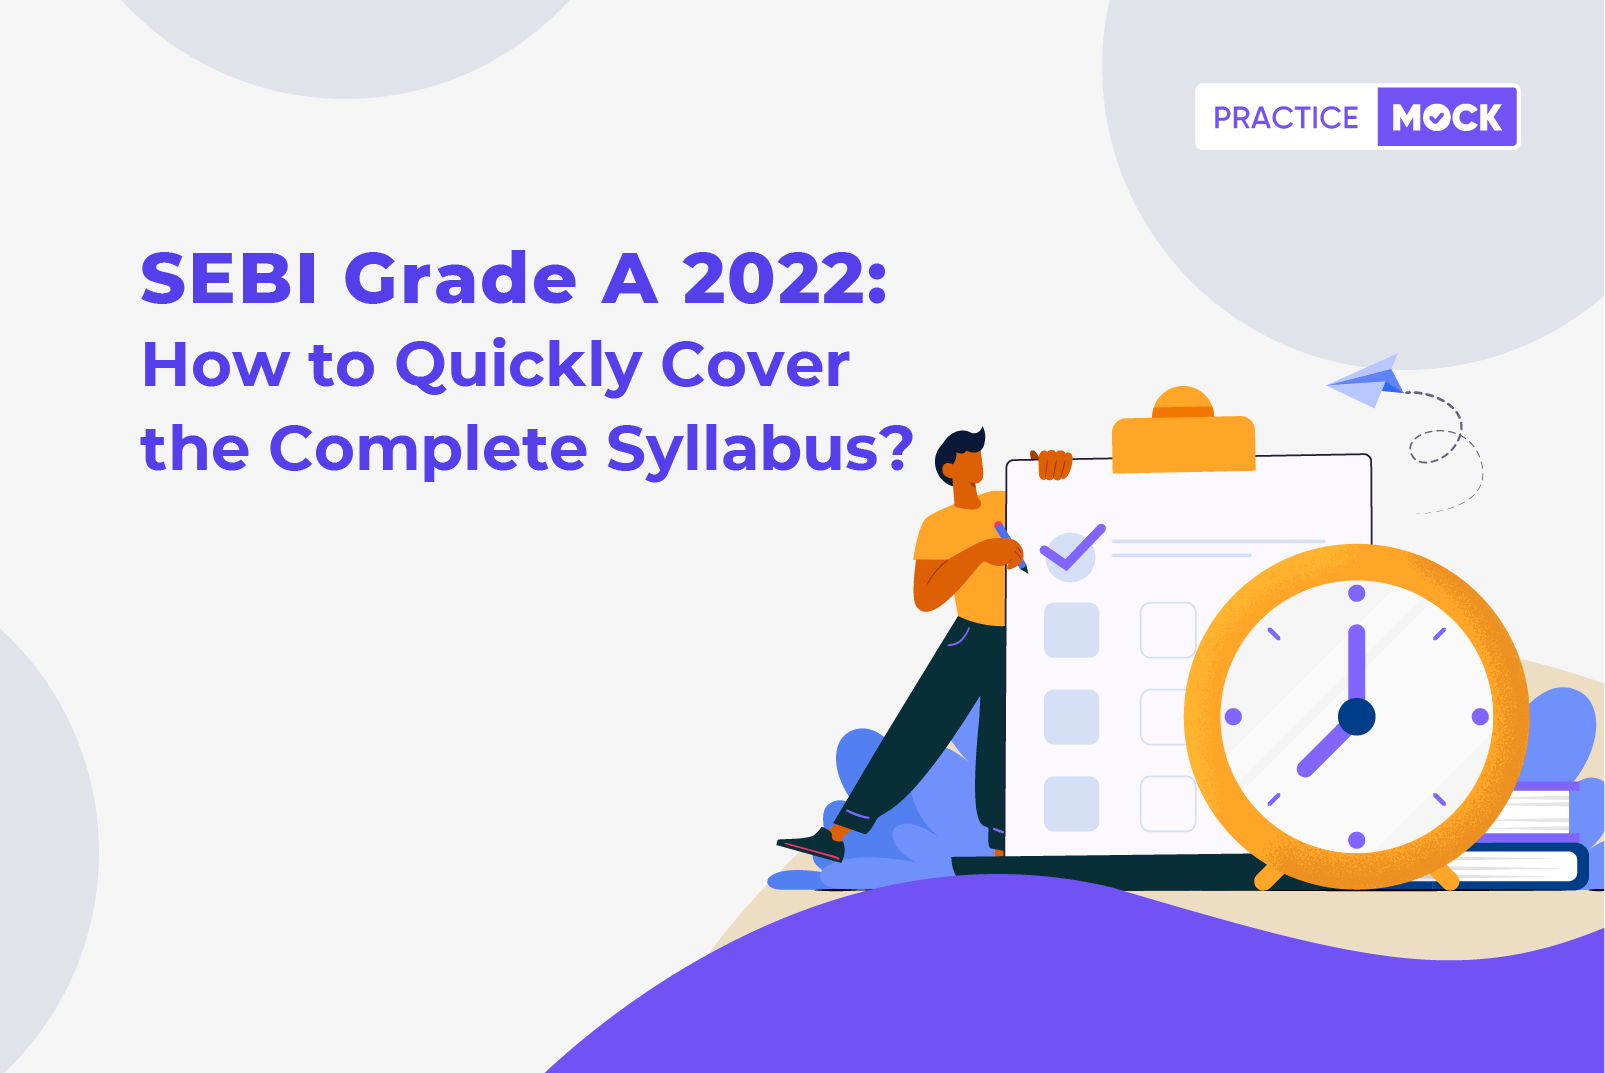 SEBI Grade A 2022-How to quickly cover the complete syllabus?